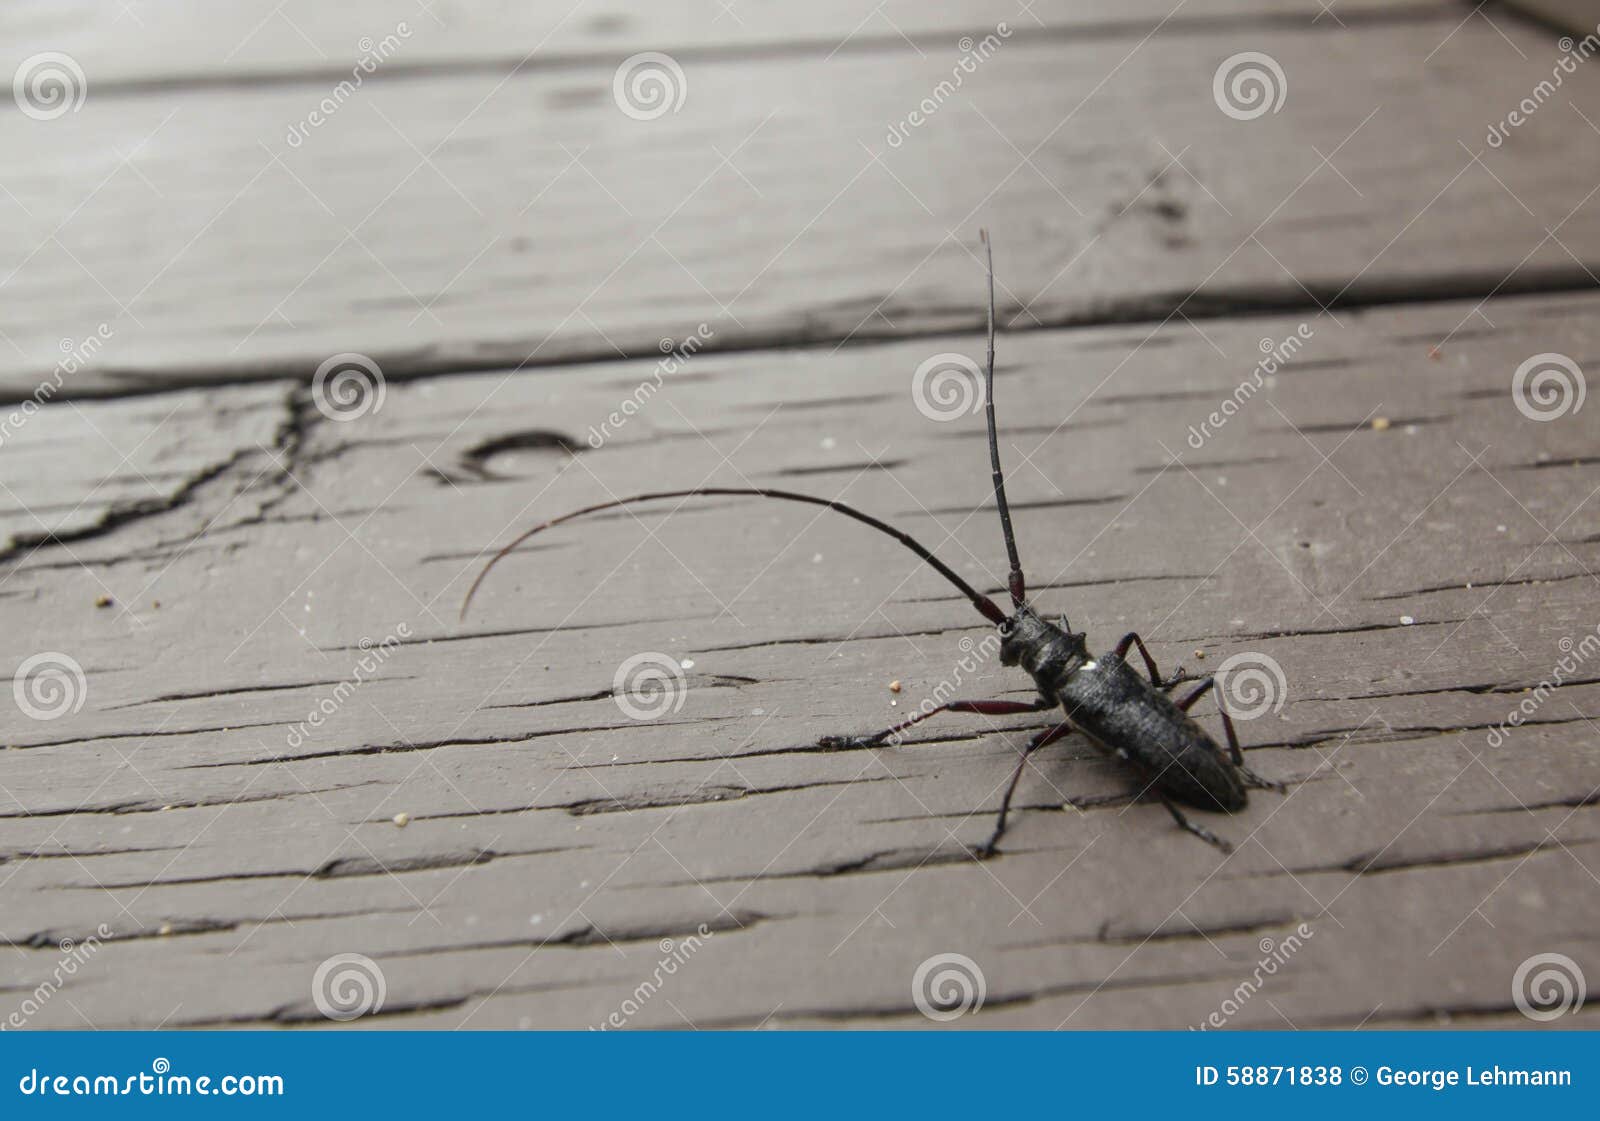 insect porch sawyer beetle summer morning front 58871838